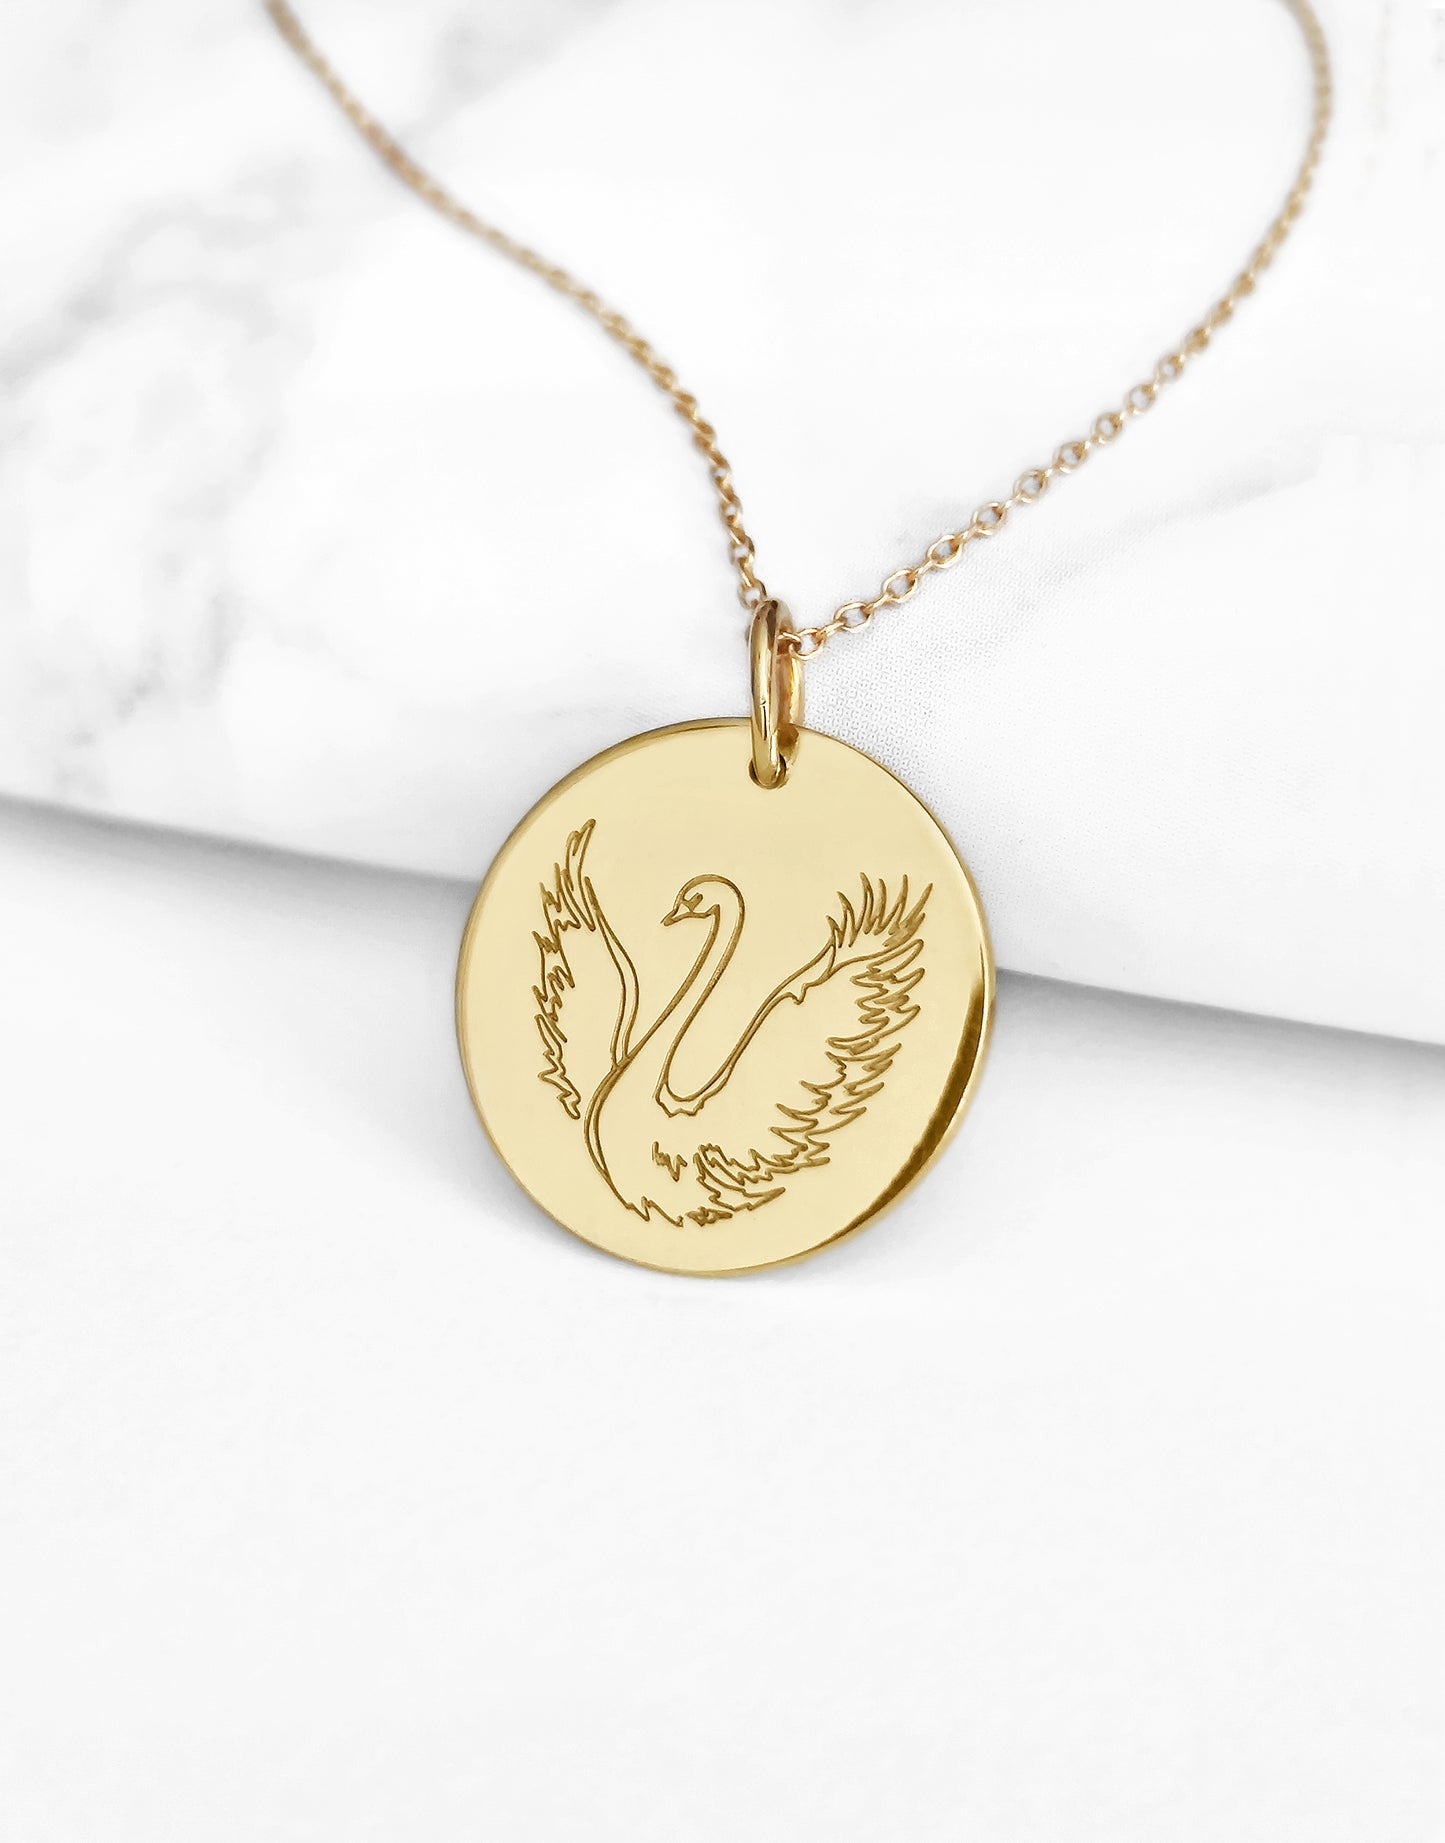 14K 9K Solid Gold Personalized Dainty Swan Pendant Necklace